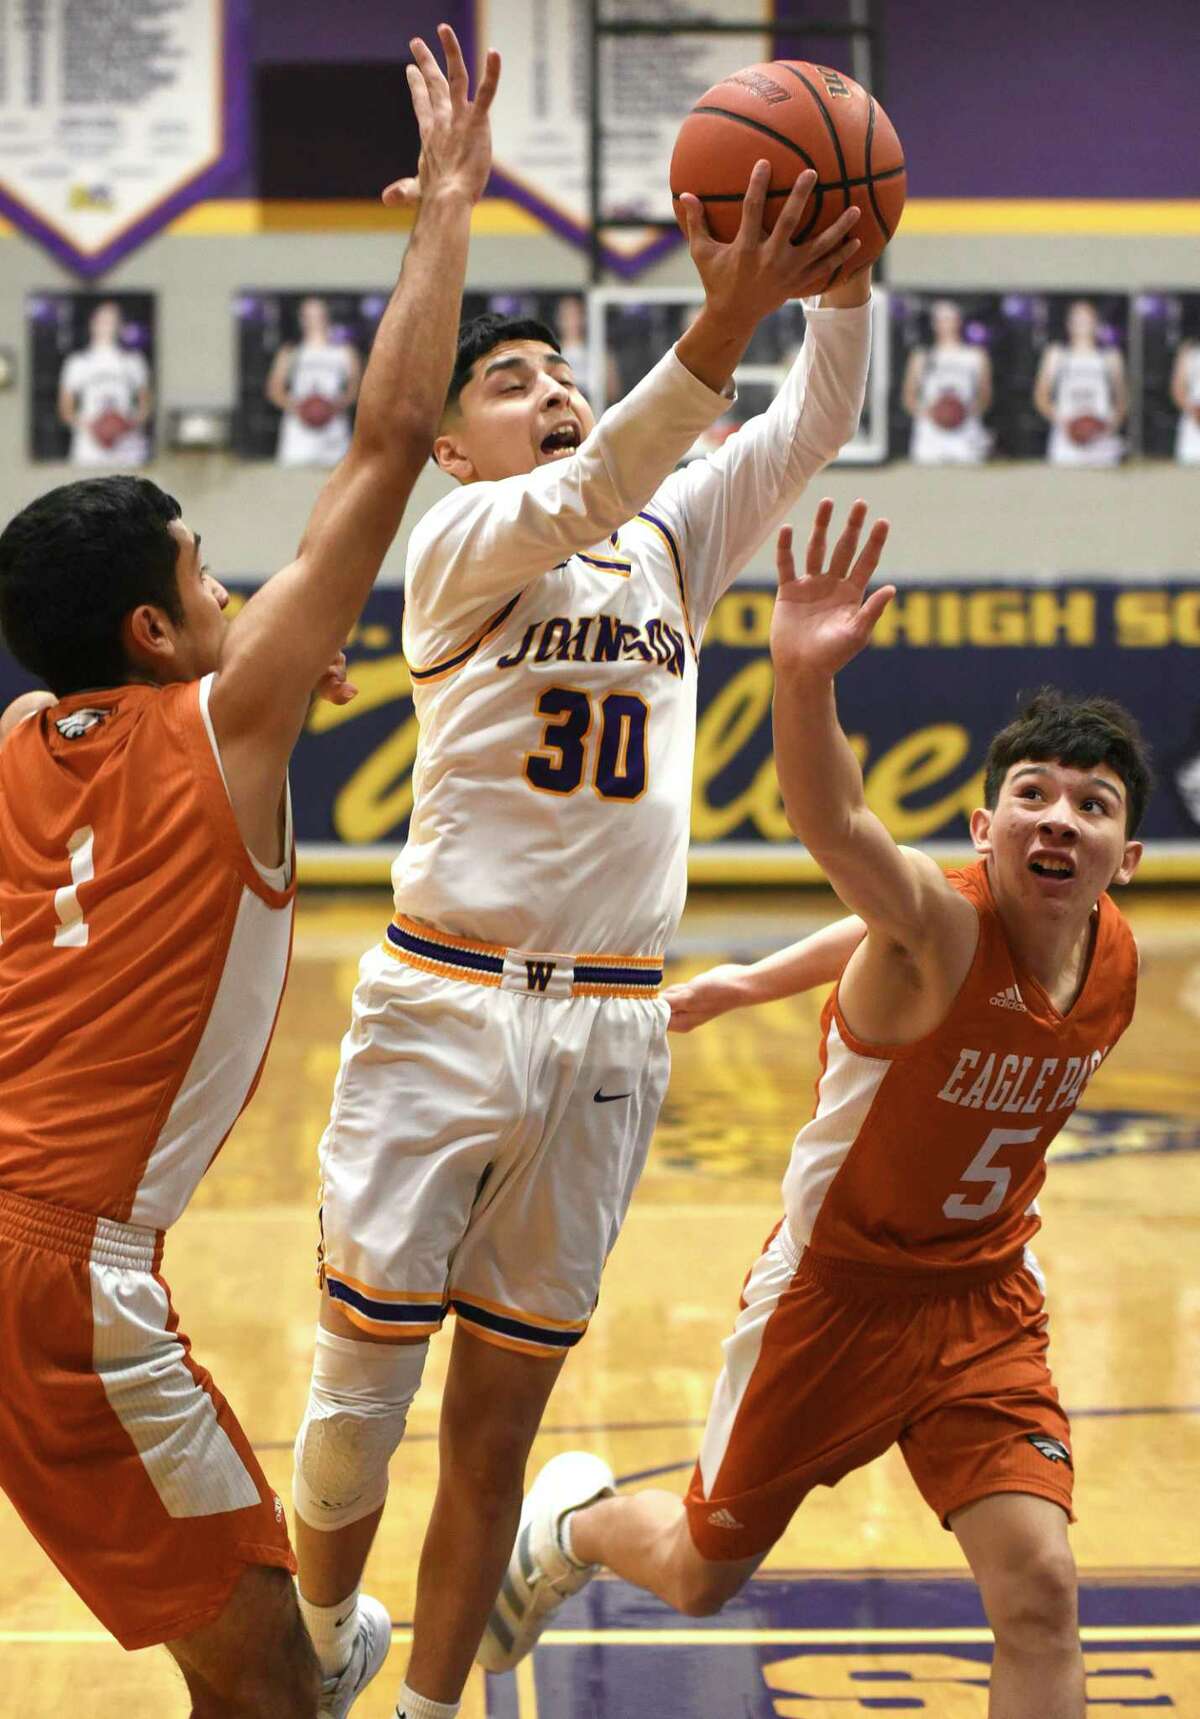 Ramon Anguiano scored 12 points in LBJ’s 101-85 win over Eagle Pass on Friday.